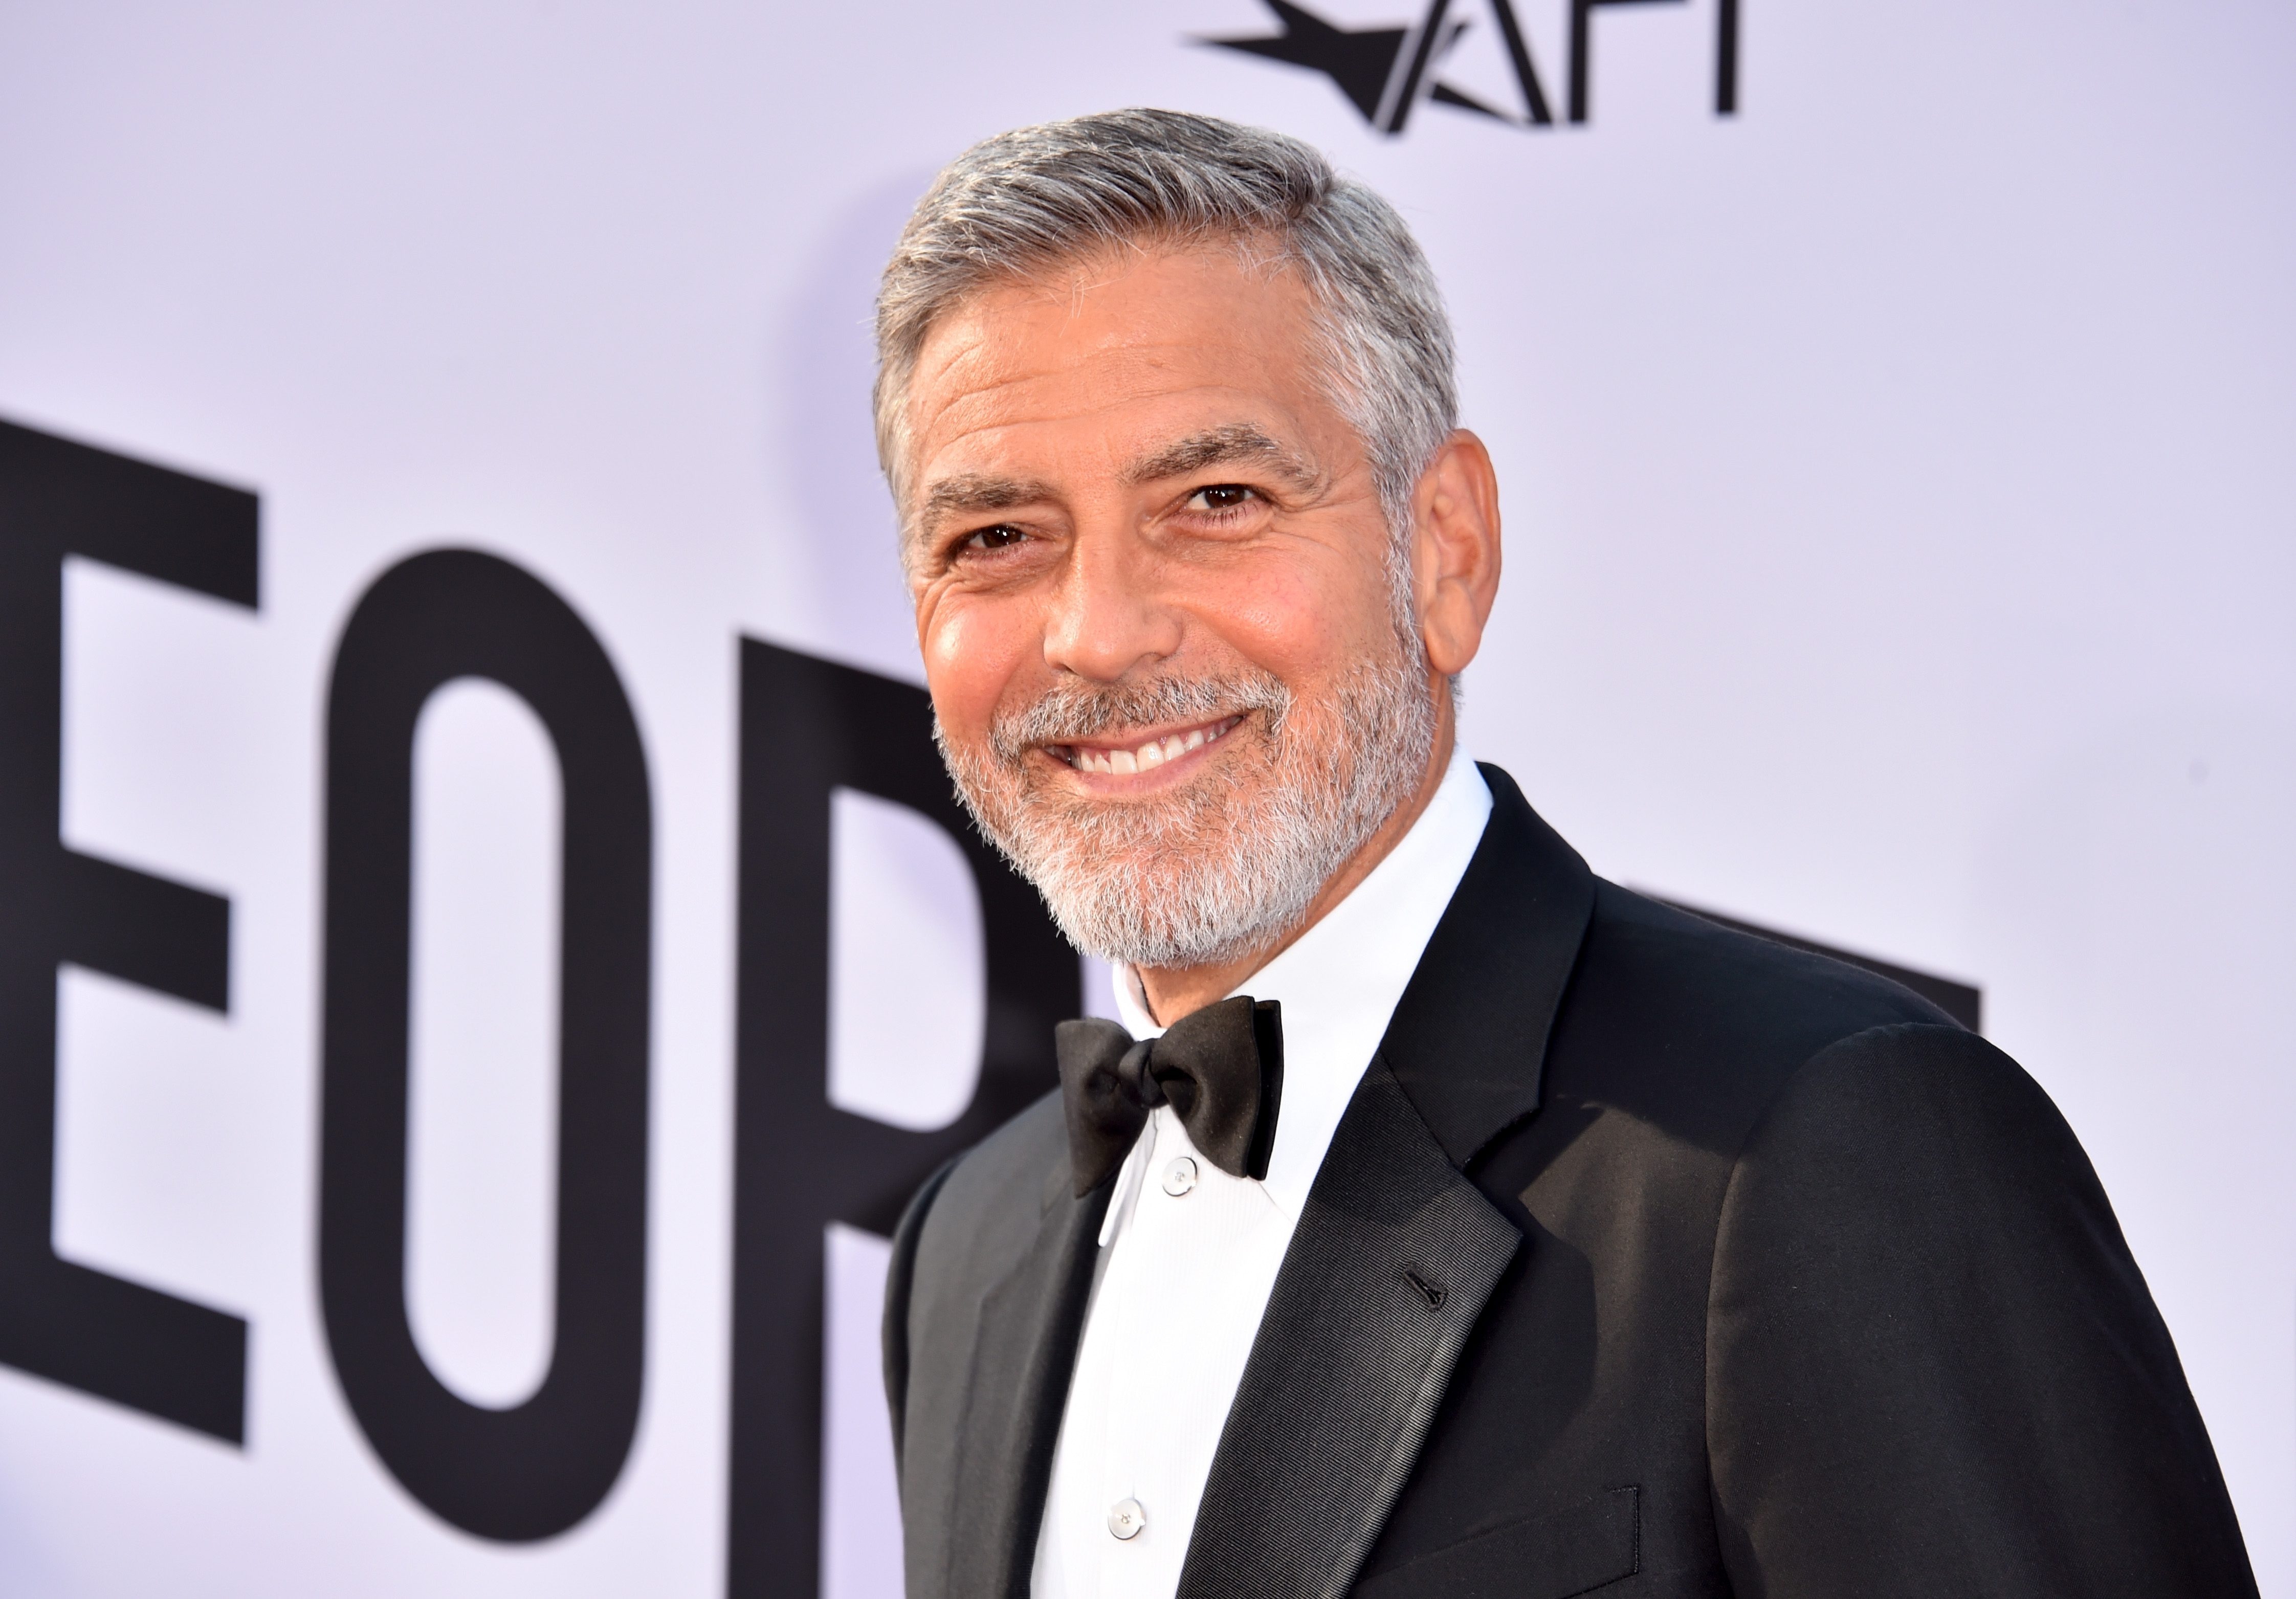 George Clooney attends the American Film Institute's Life Achievement Award Gala Tribute to George Clooney